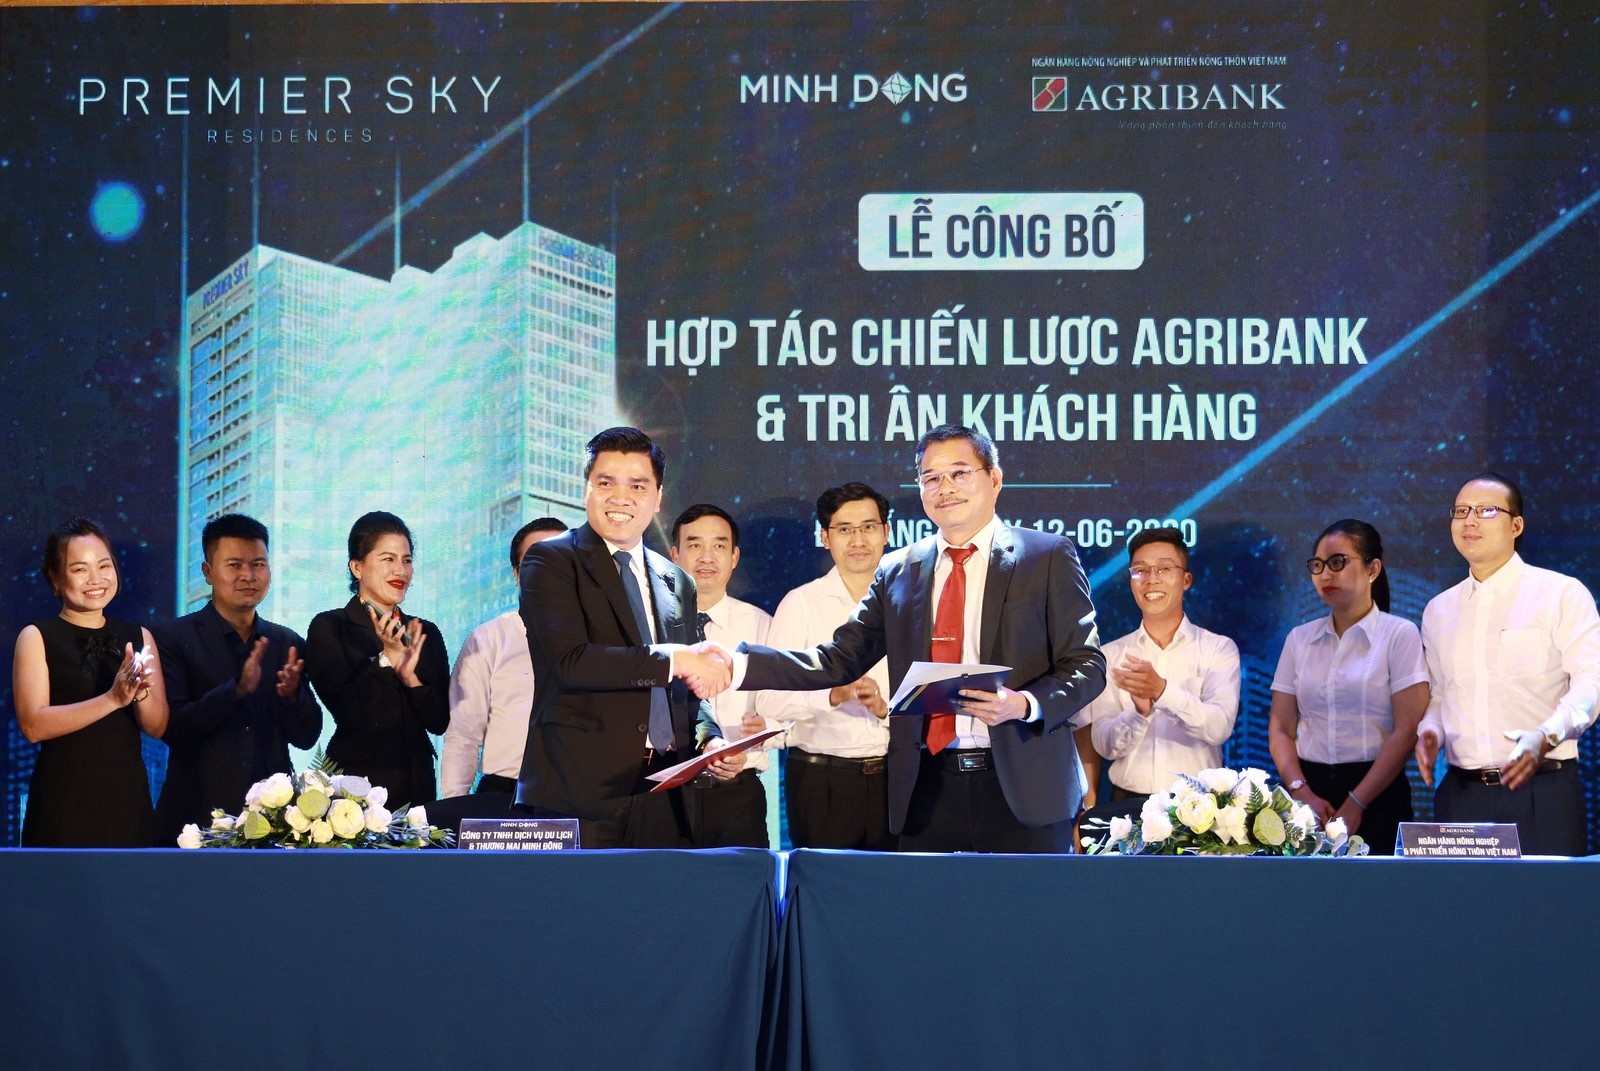 cong ty minh dong hop tac chien luoc voi agribank